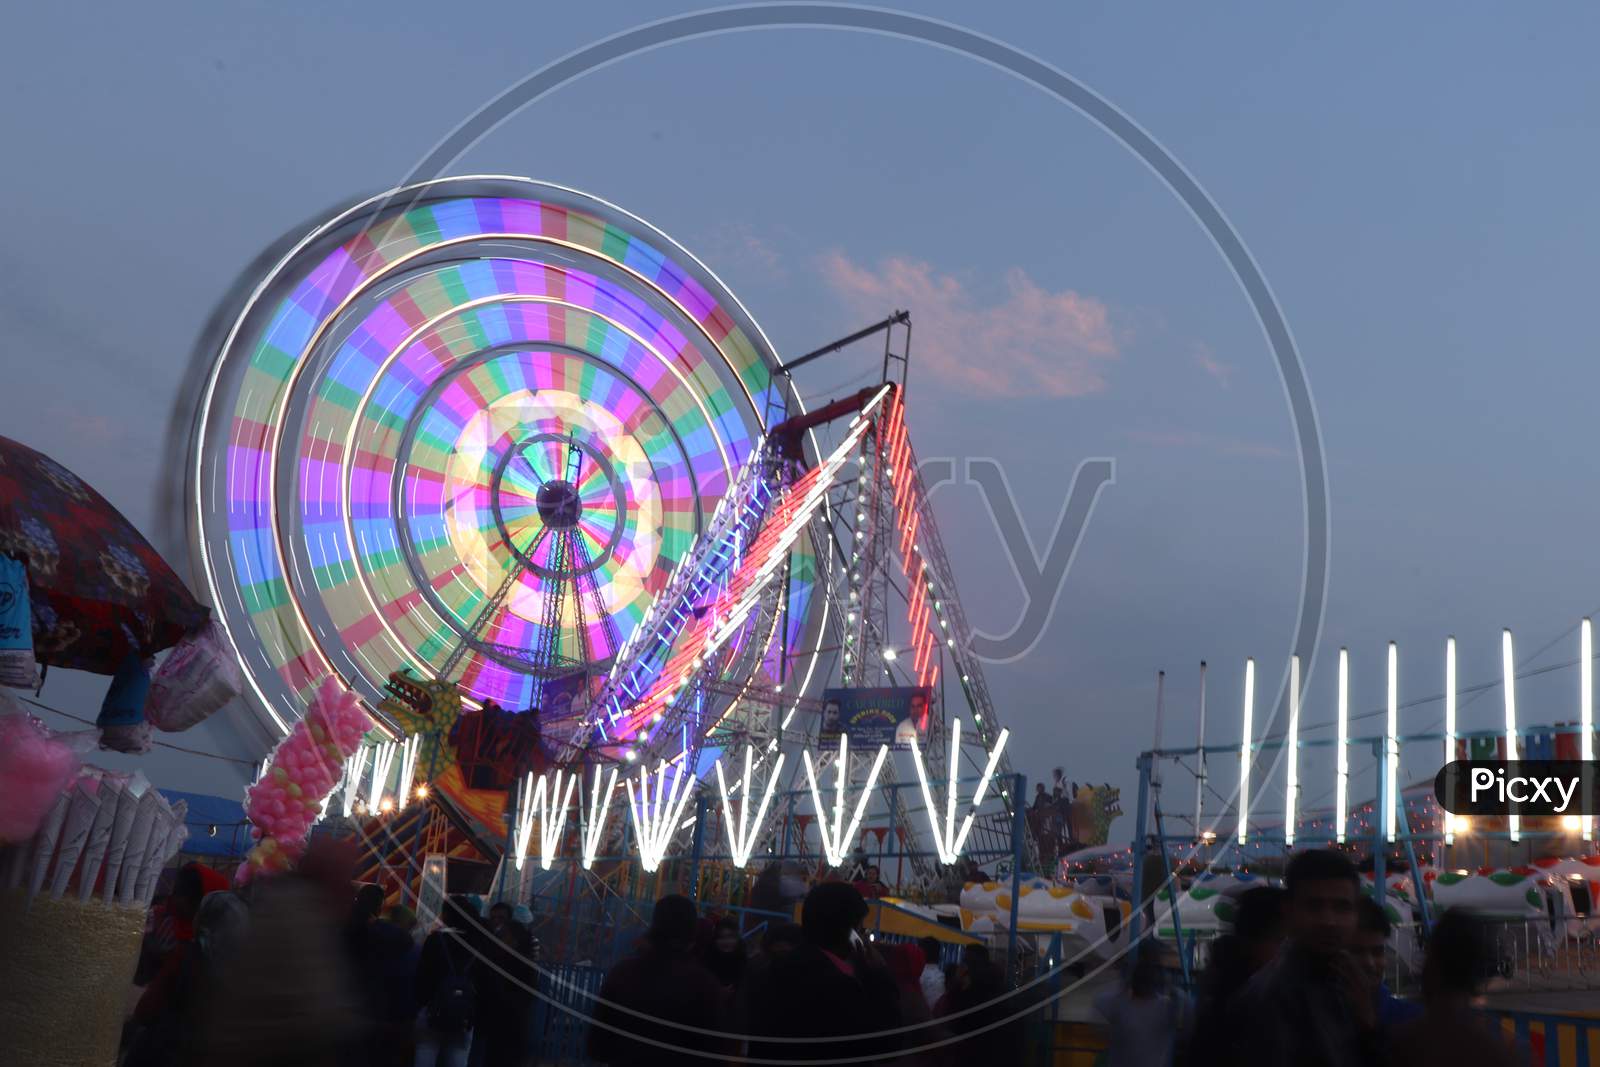 Amusement Rides In a Fair With Giant Wheel